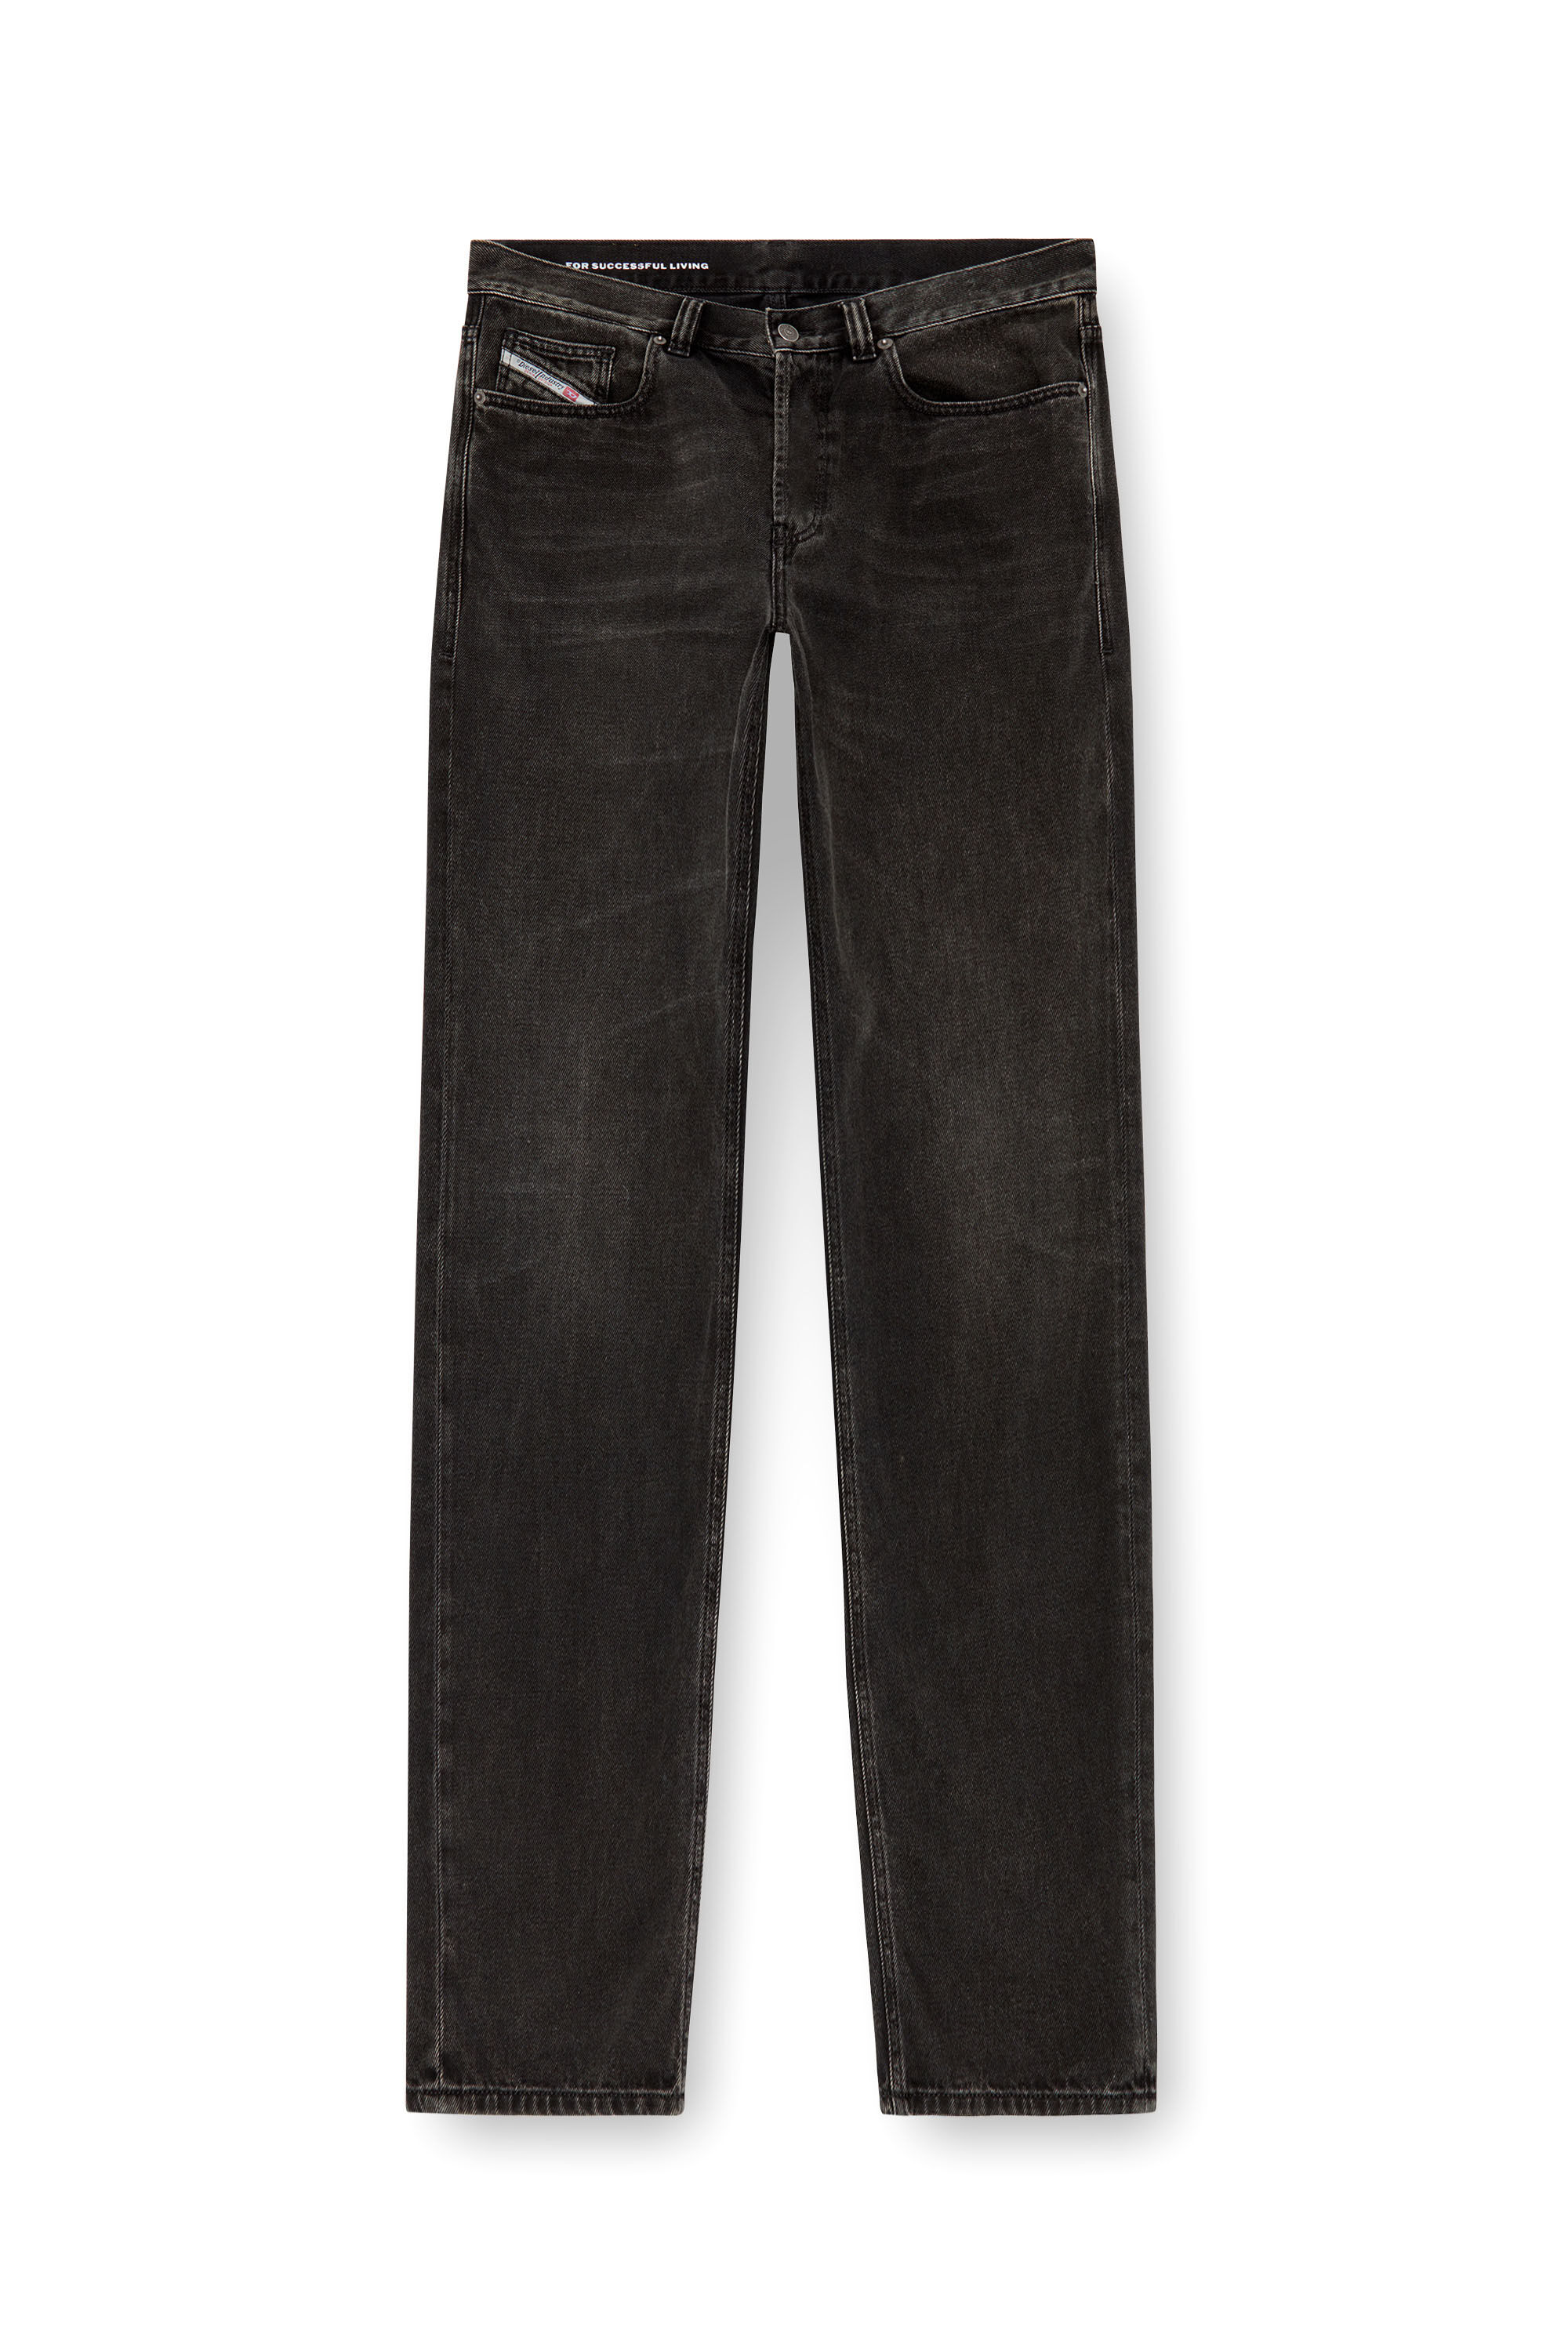 Diesel - Straight Jeans 2010 D-Macs 09J96, Hombre Straight Jeans - 2010 D-Macs in Negro - Image 2